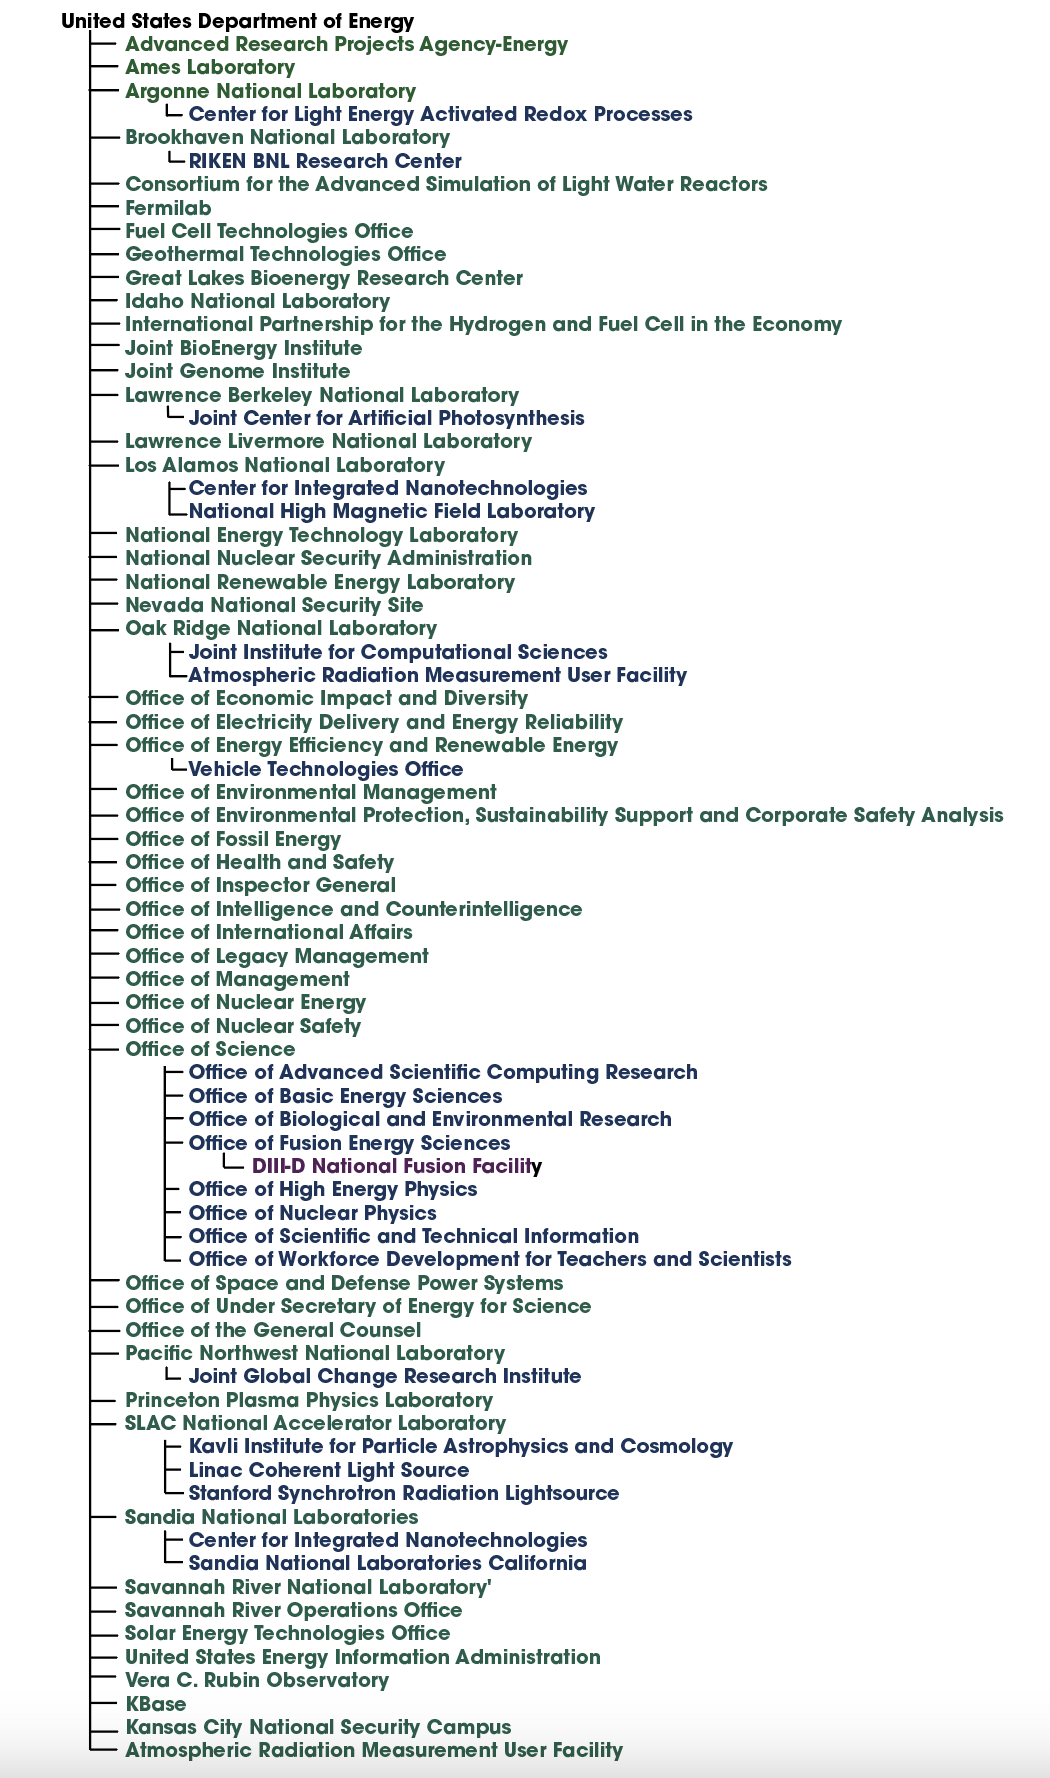 List of US Department of Energy children and grandchildren expressed as items in an indented list from the ROR organization tree script written by Sandra Mierz.